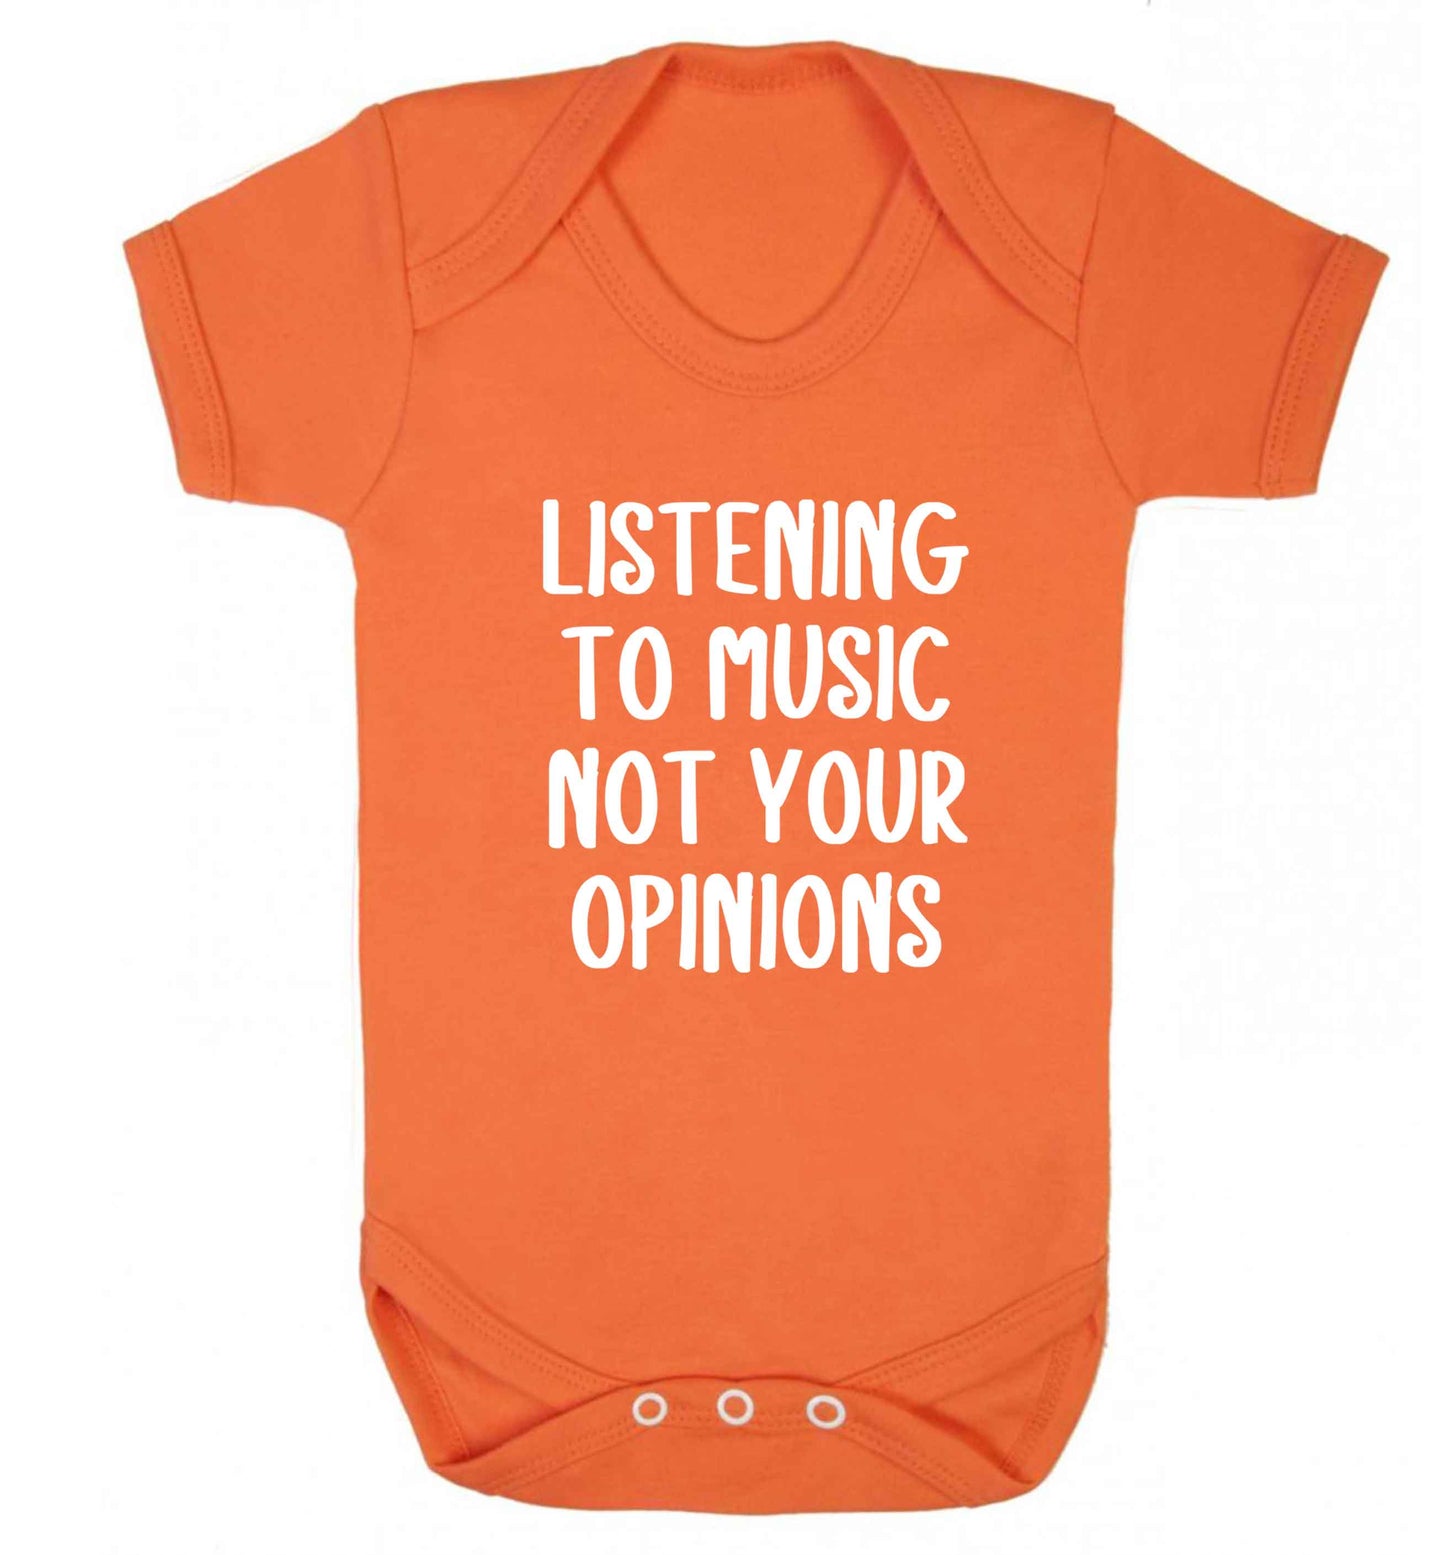 Listening to music not your opinions baby vest orange 18-24 months